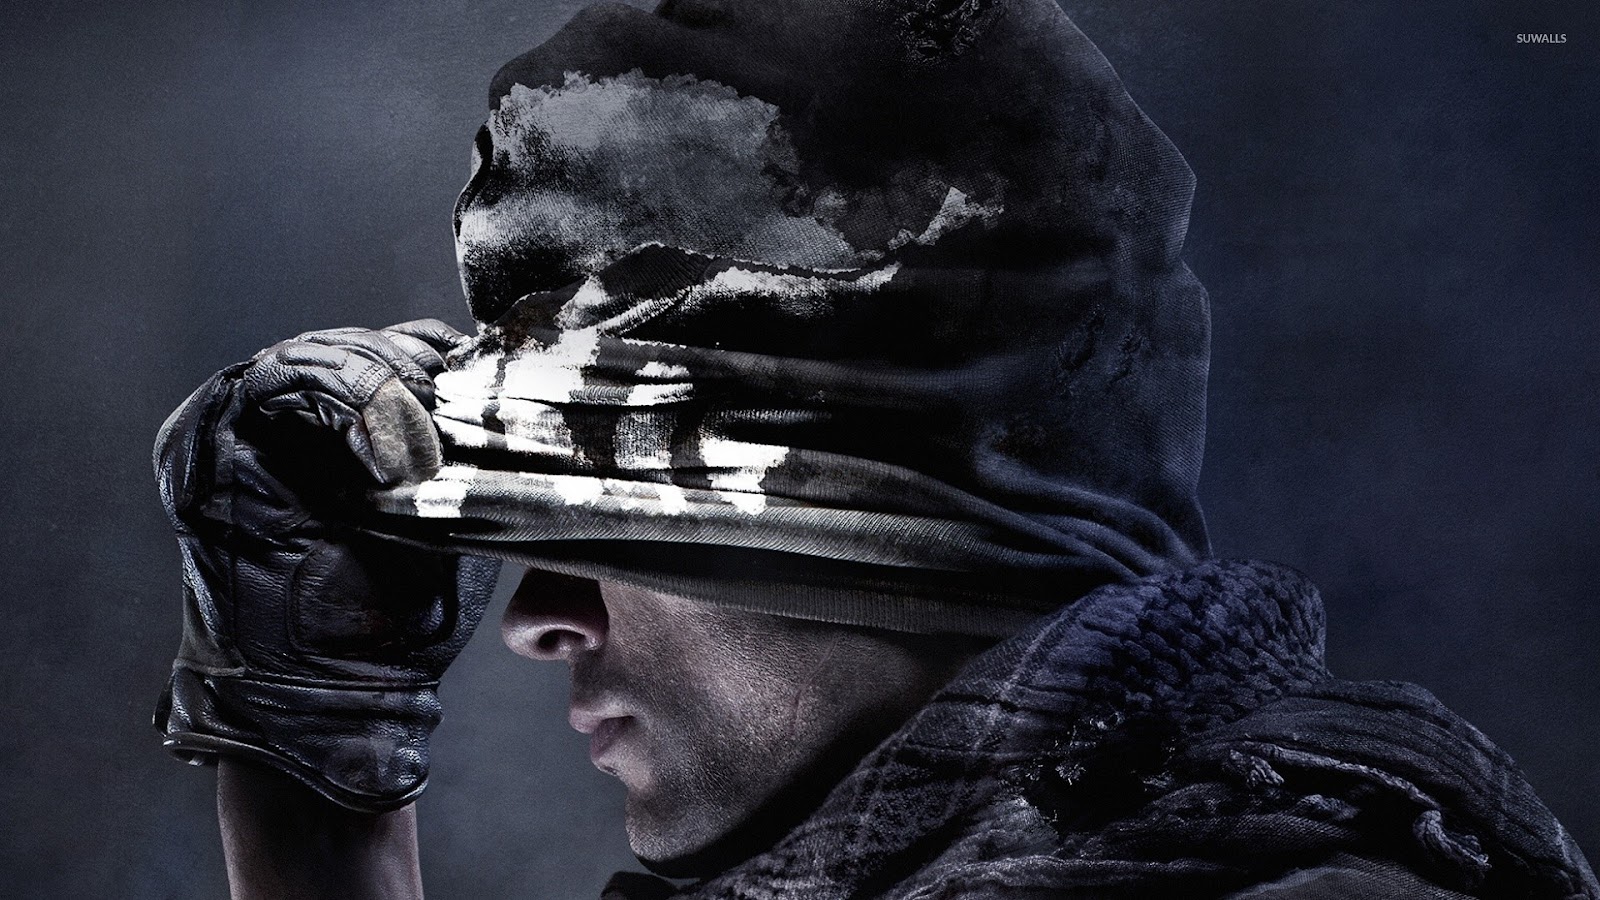 Call-of-duty-ghosts-27138-1920x1080